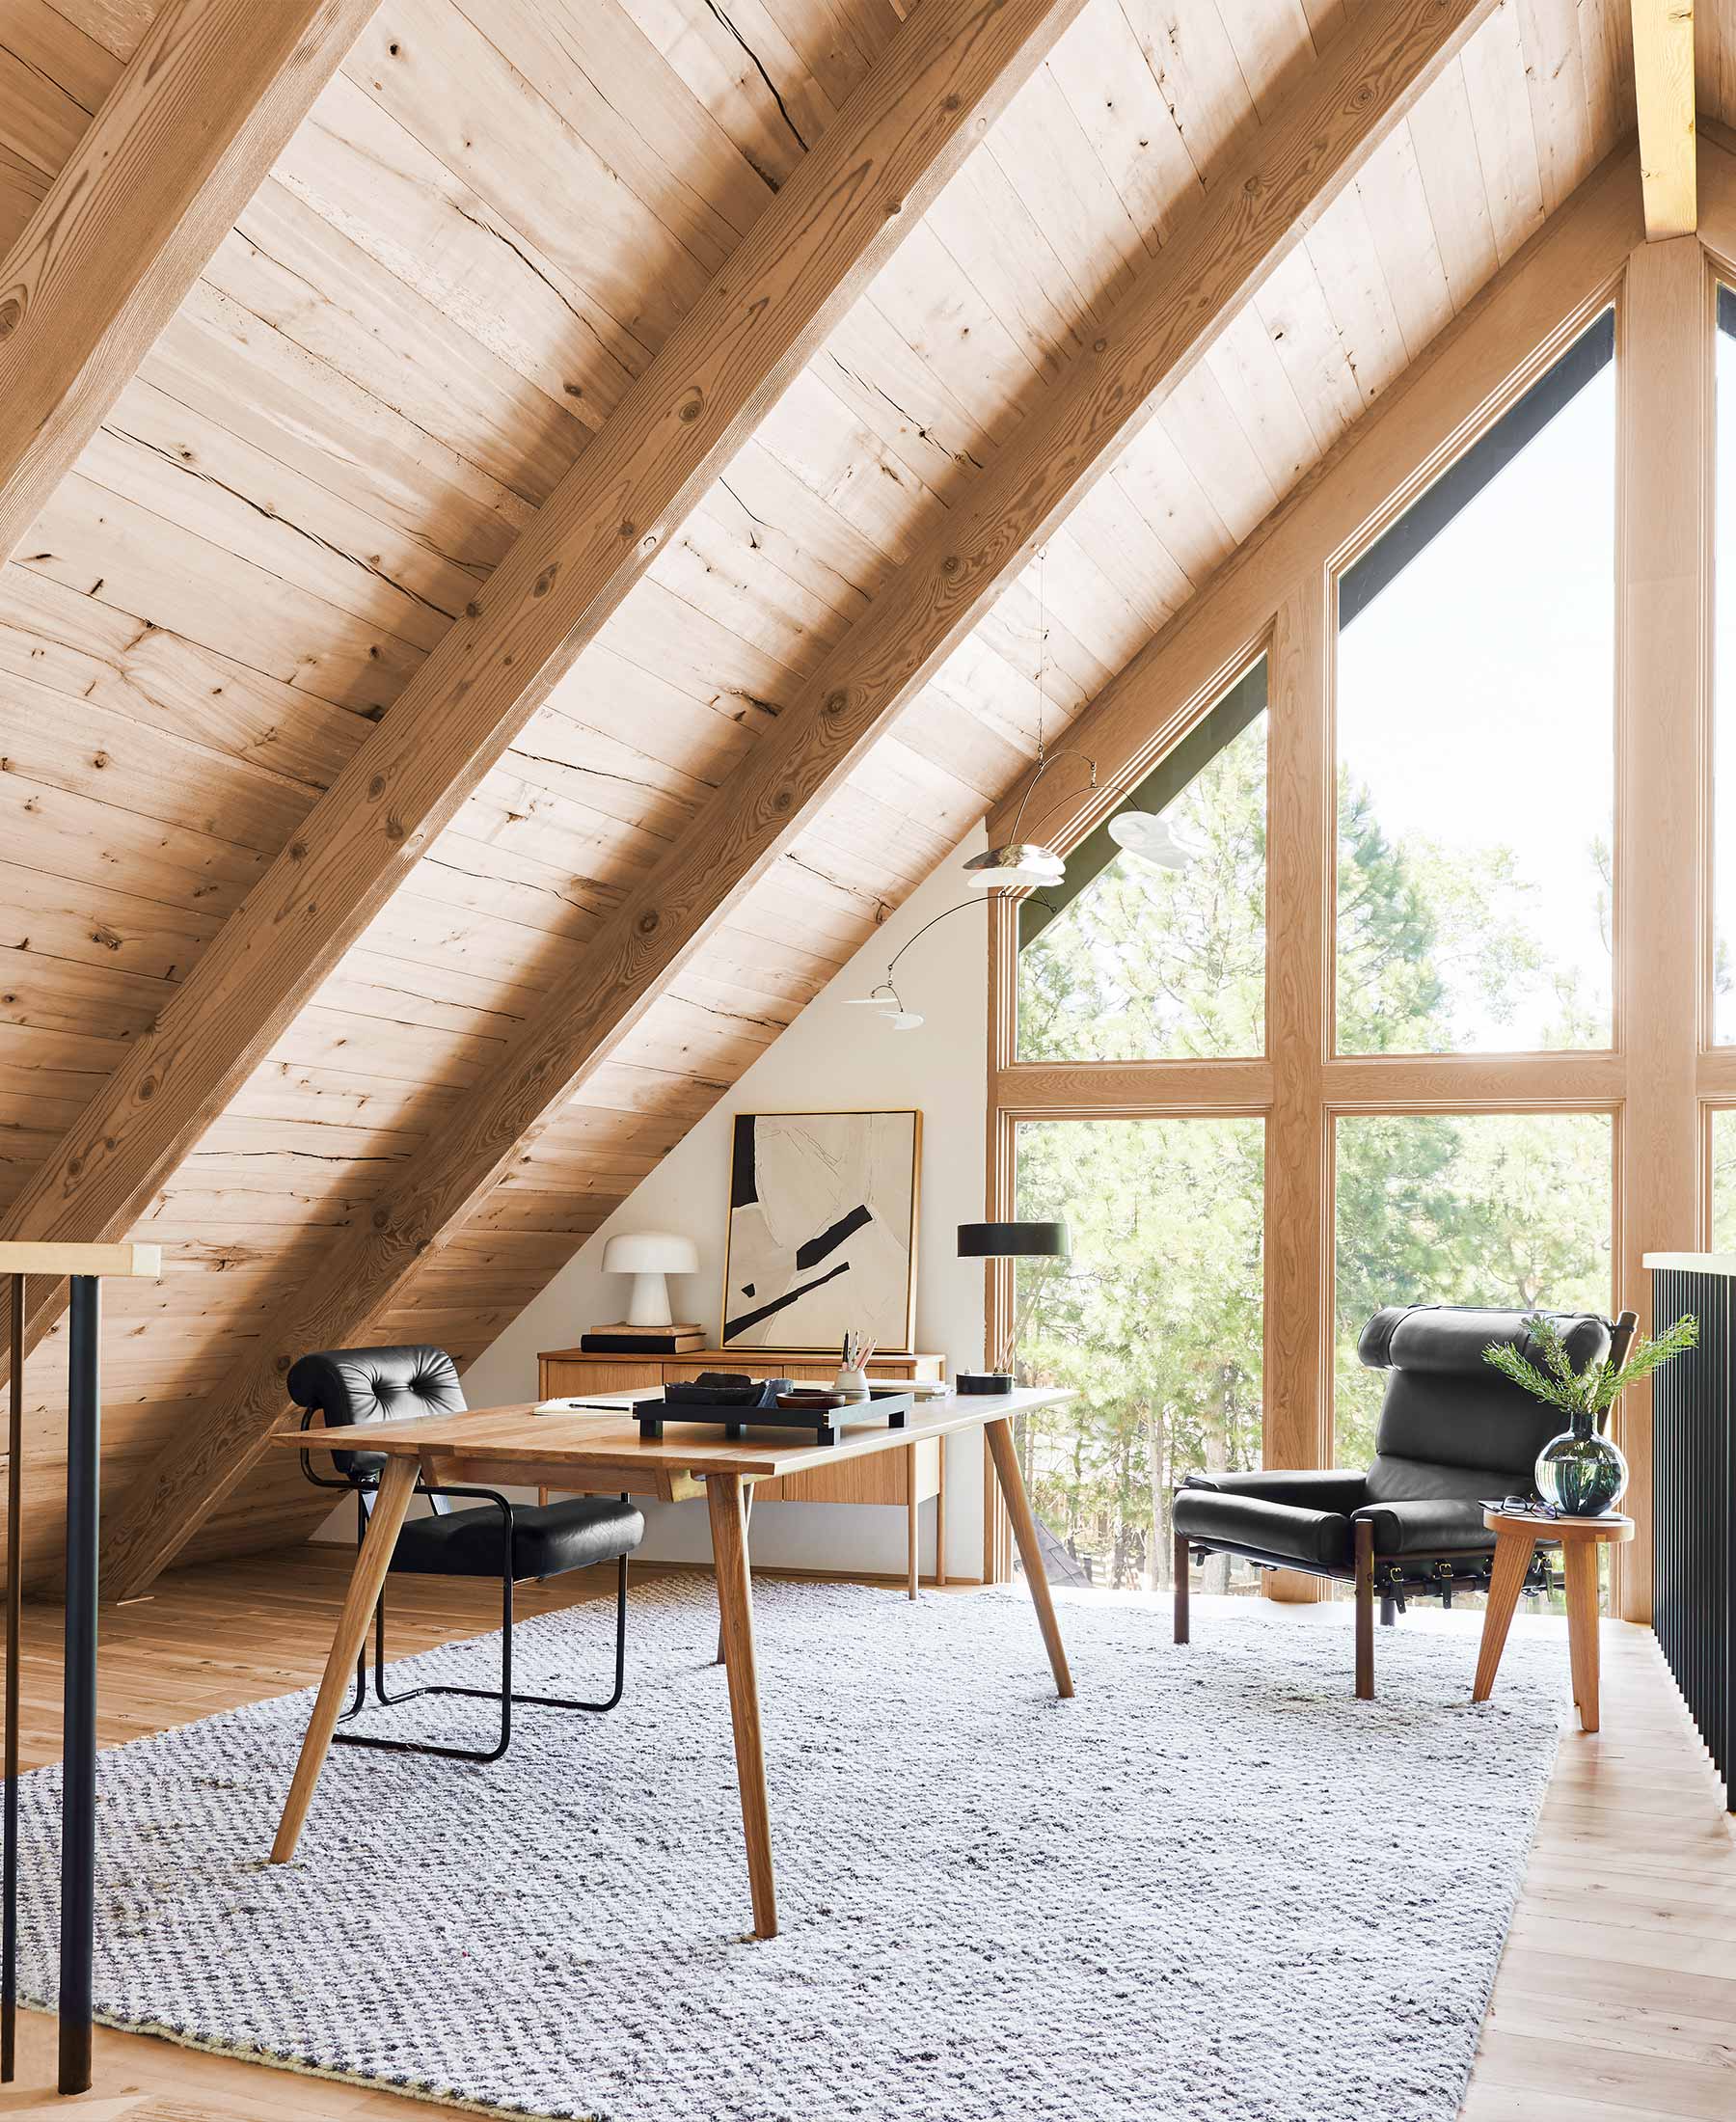 A wood and beam ceiling is featured in this home office space